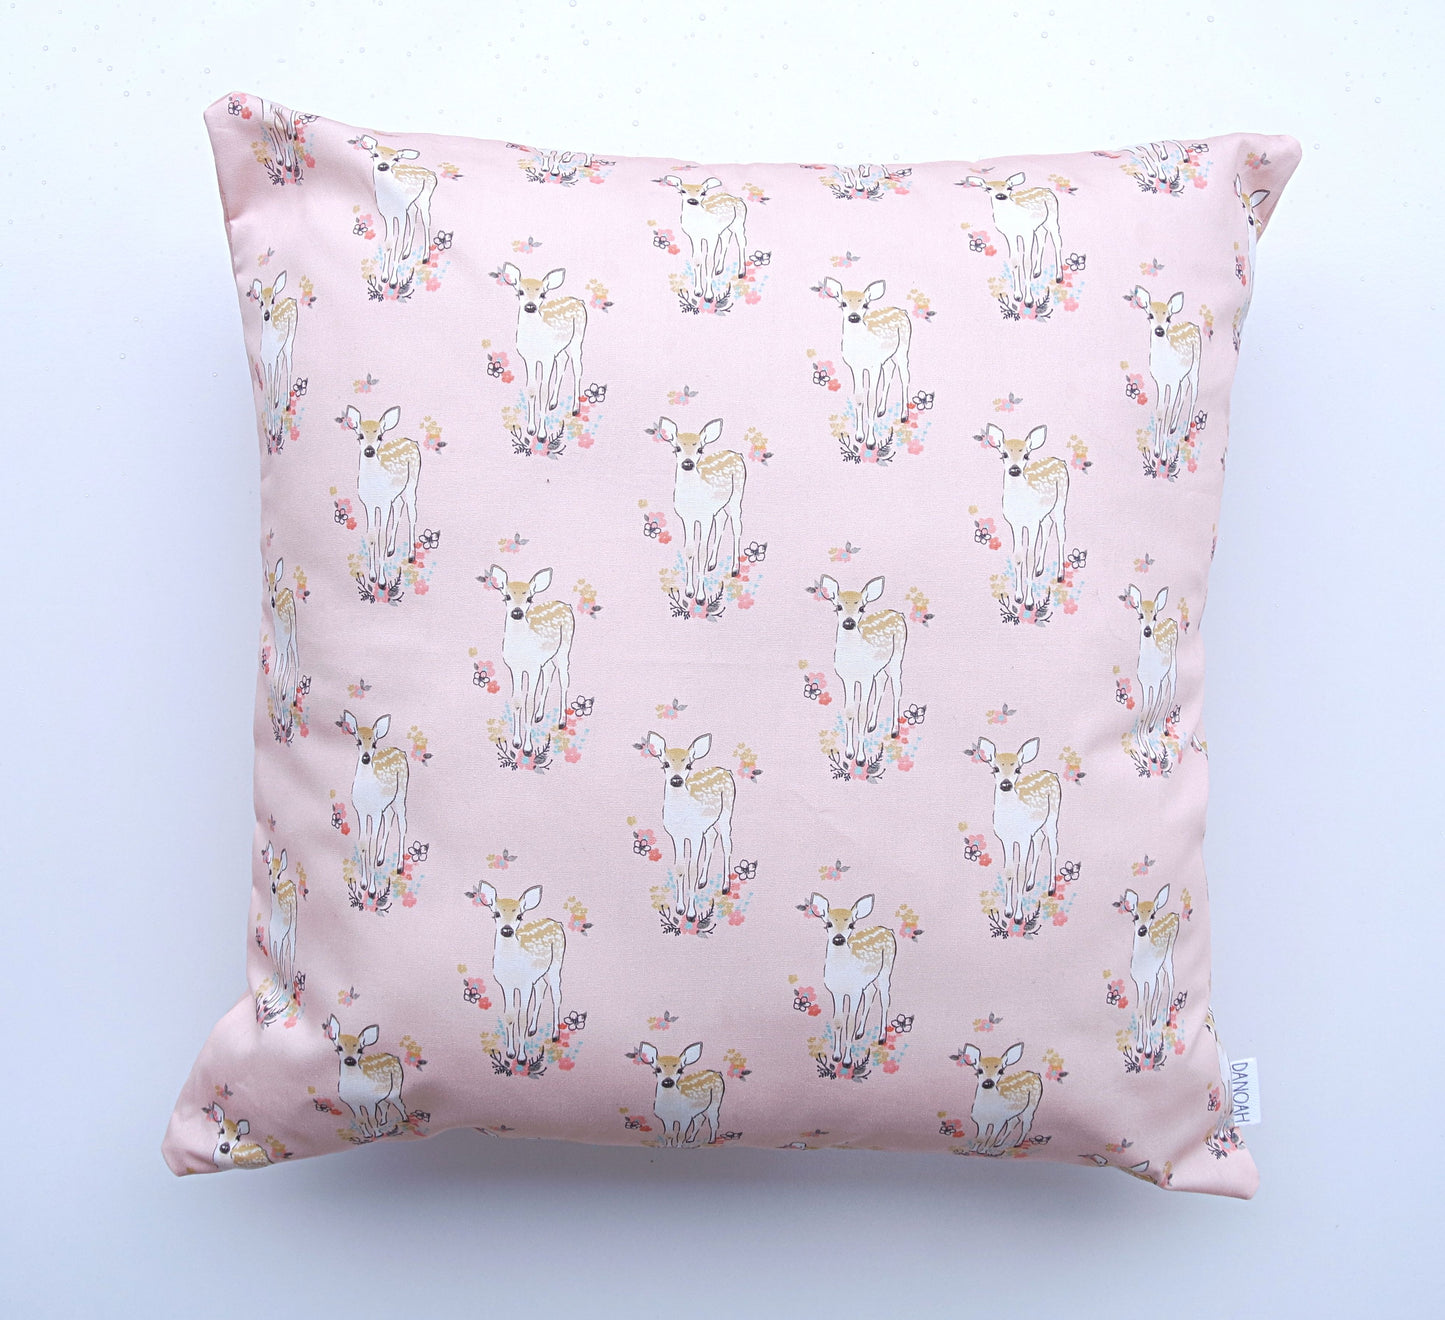 Pink Baby Deer Cushion Cover